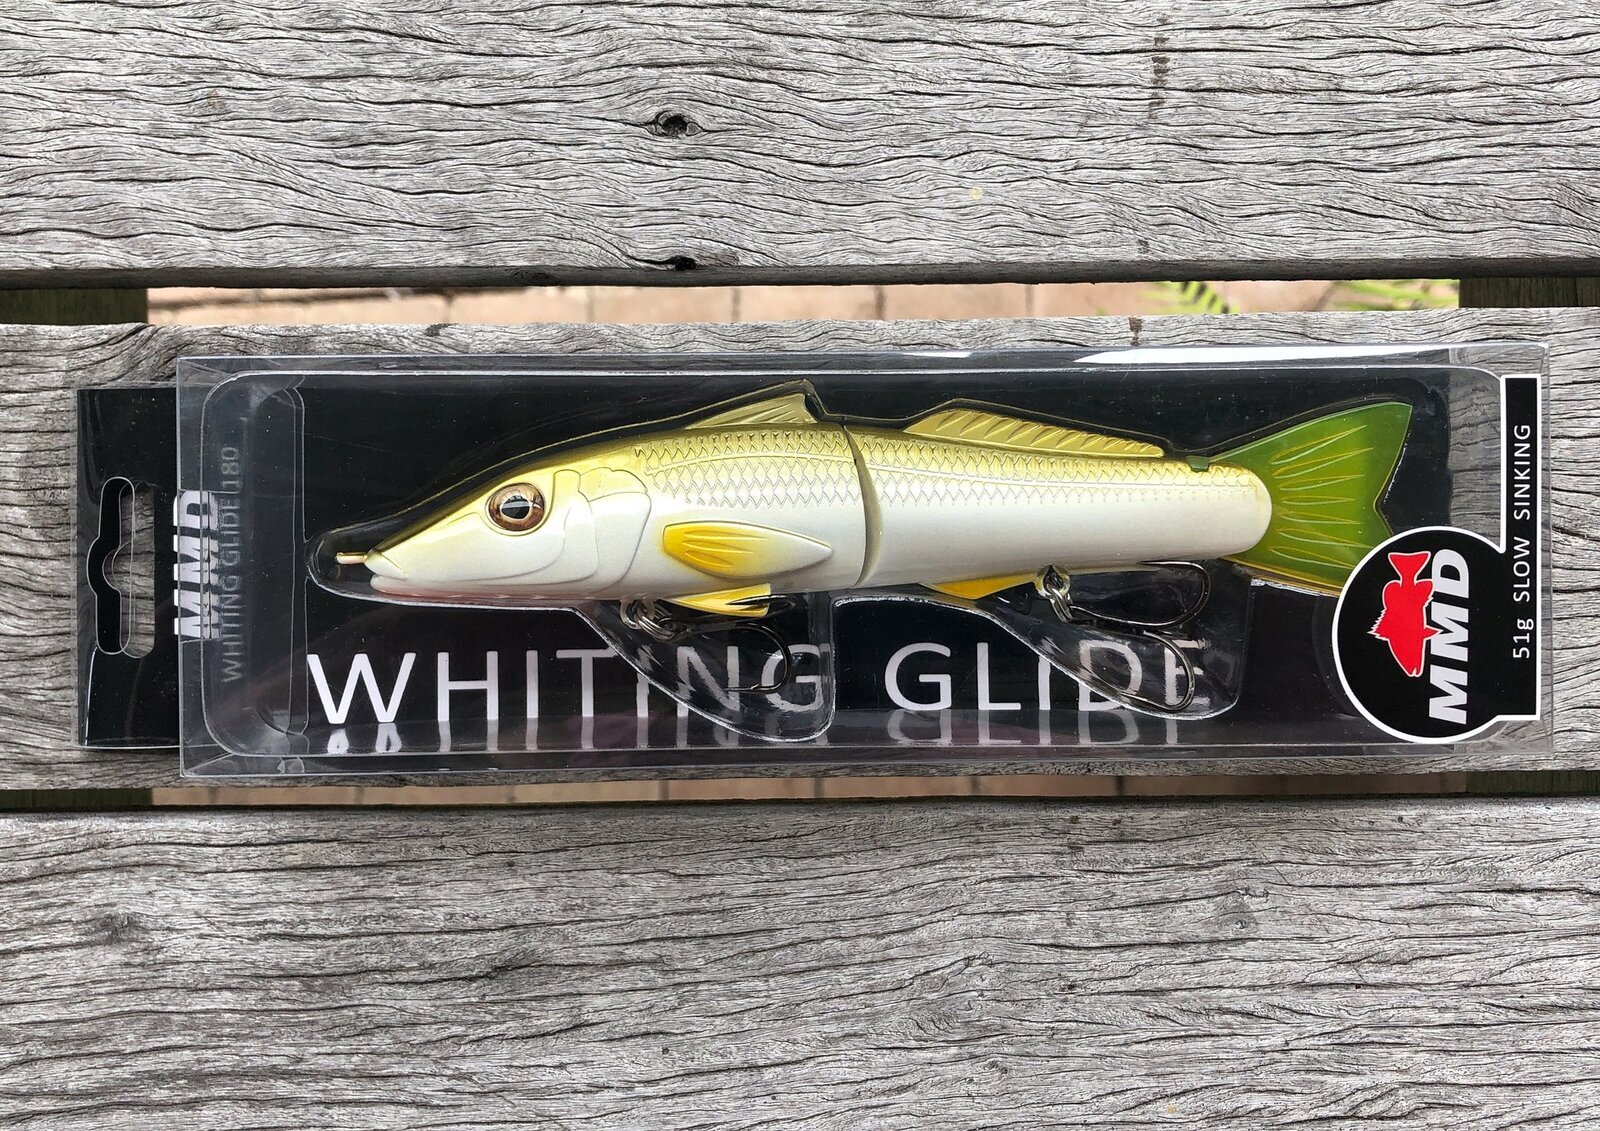 MMD Whiting 180mm Glide Bait Fishing Lure #Sand Slow Sinking